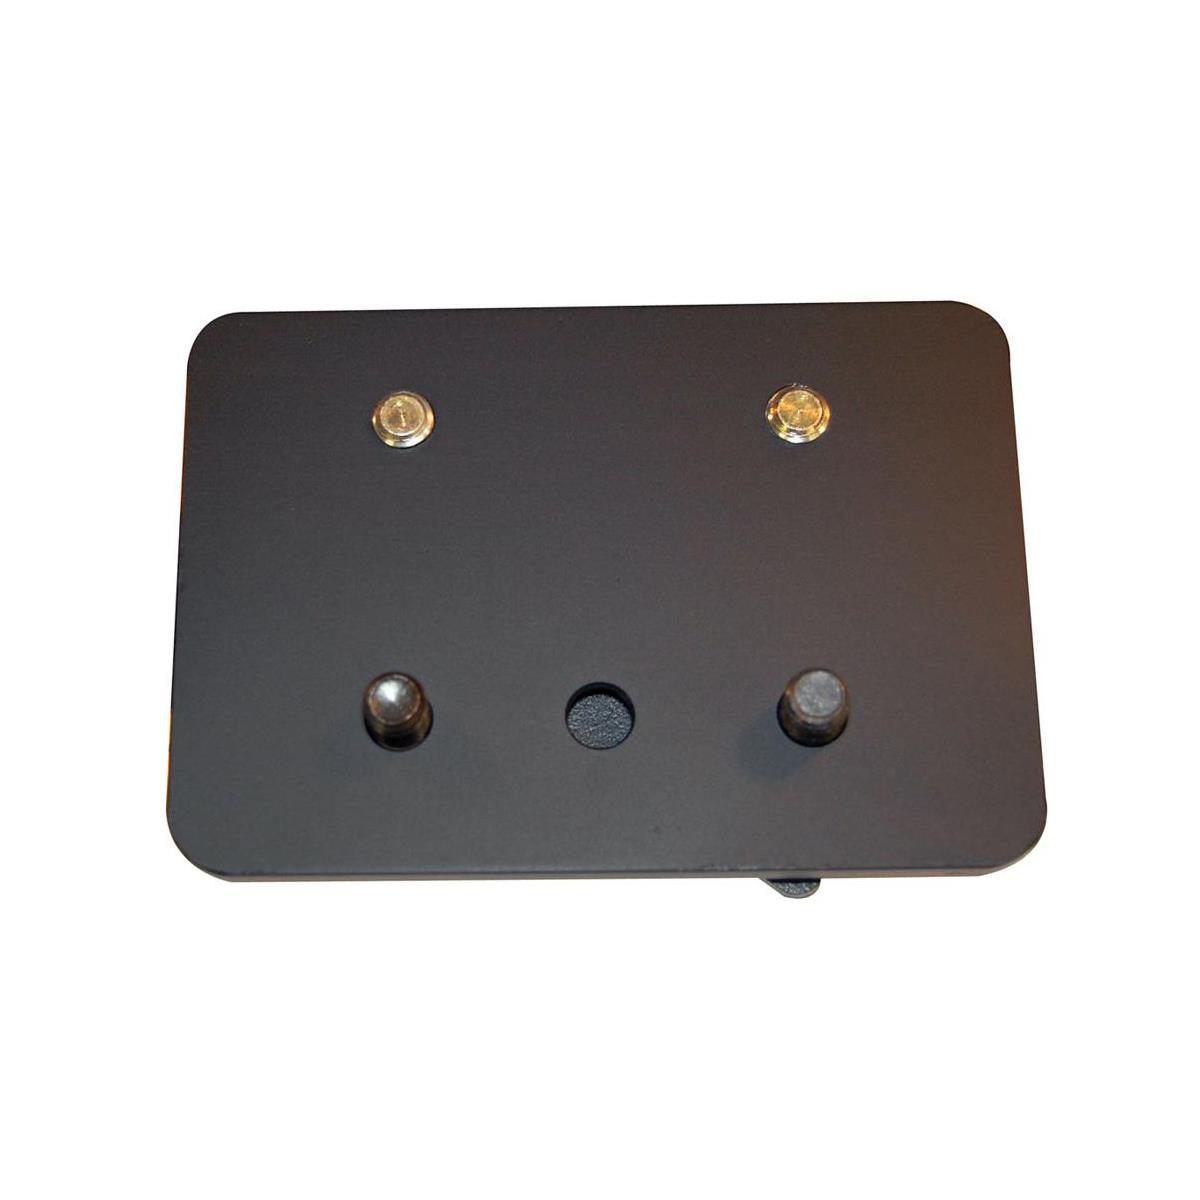 Image of Autocue Offset Plate for Pro Plate